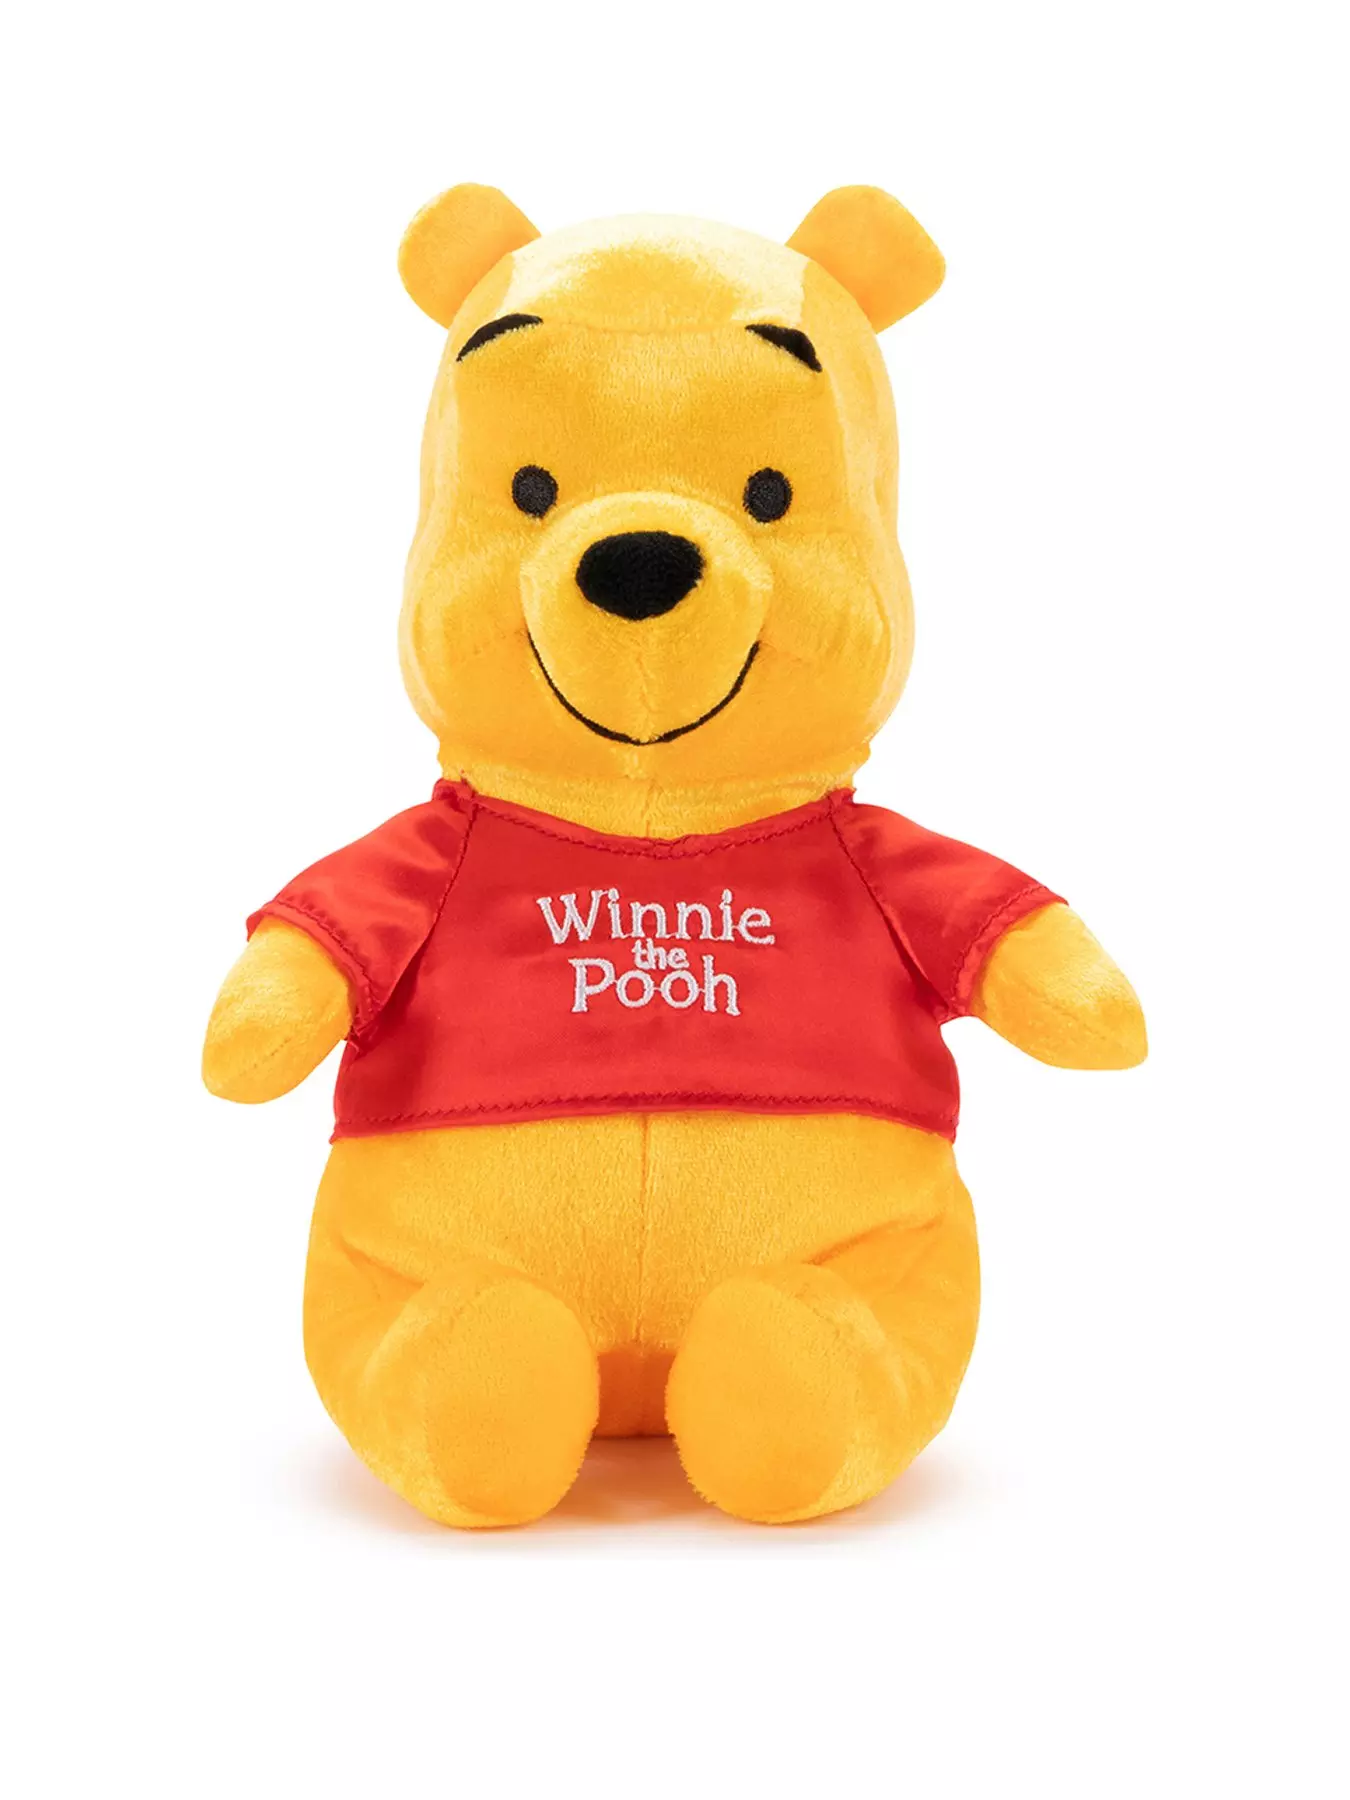 All Hail Pooh Bear Jersey! Welcome home you snuggly little guy